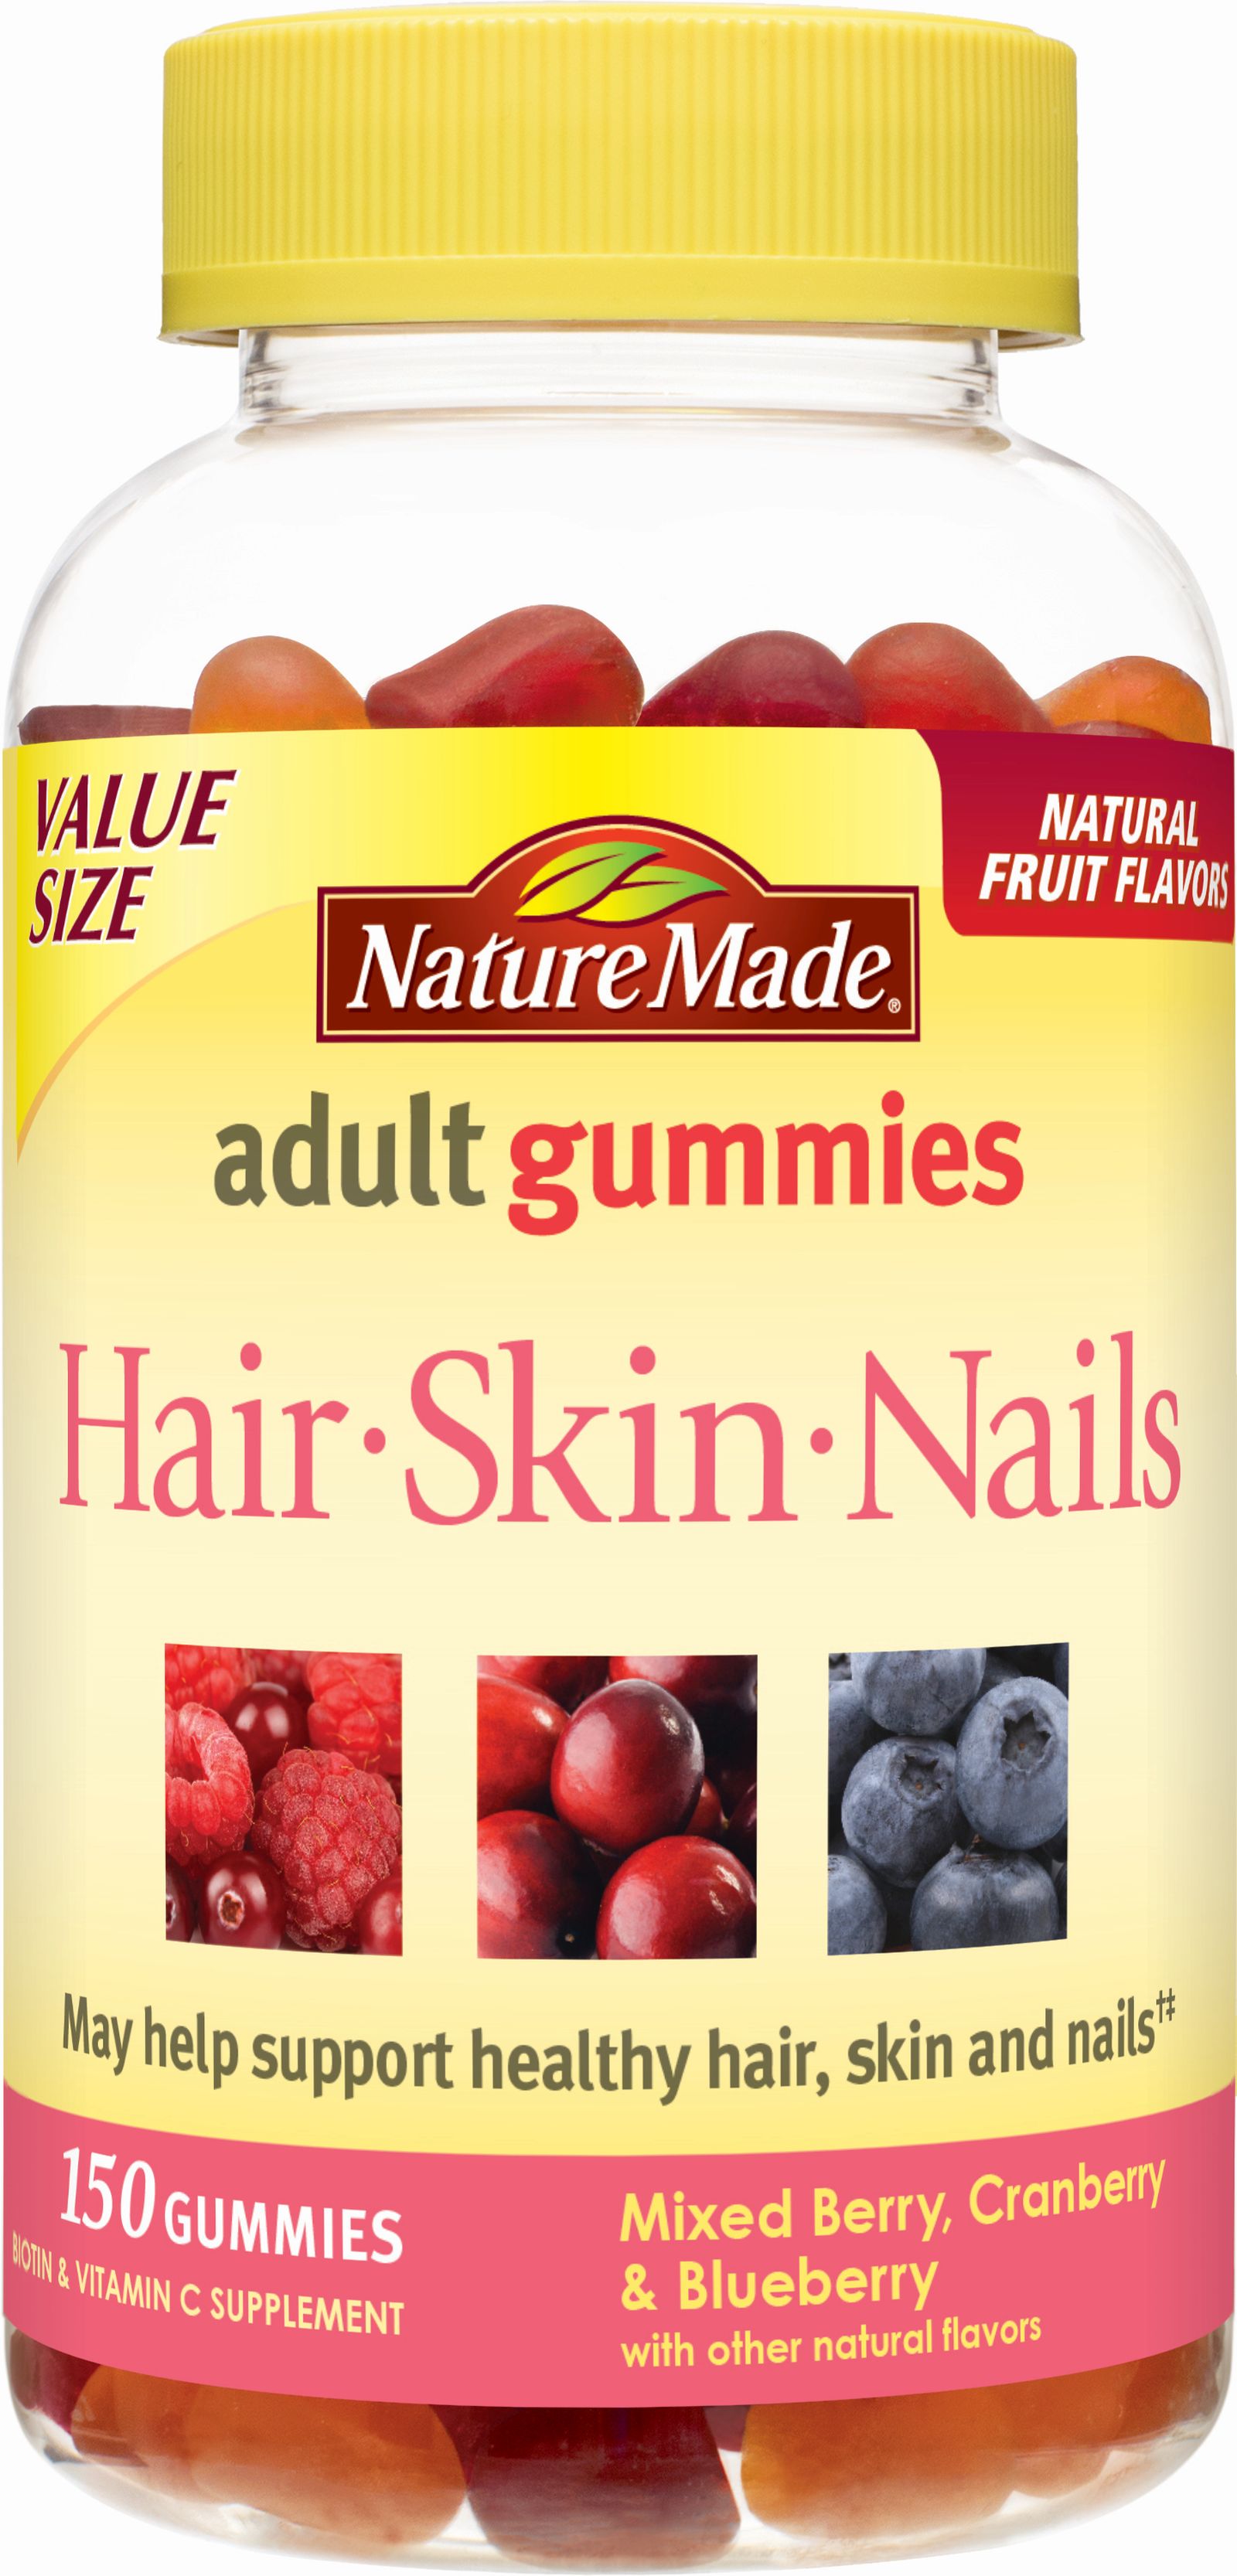 Nature Made Hair, Skin & Nails Adult Gummies, Value Size, 150 Ct.